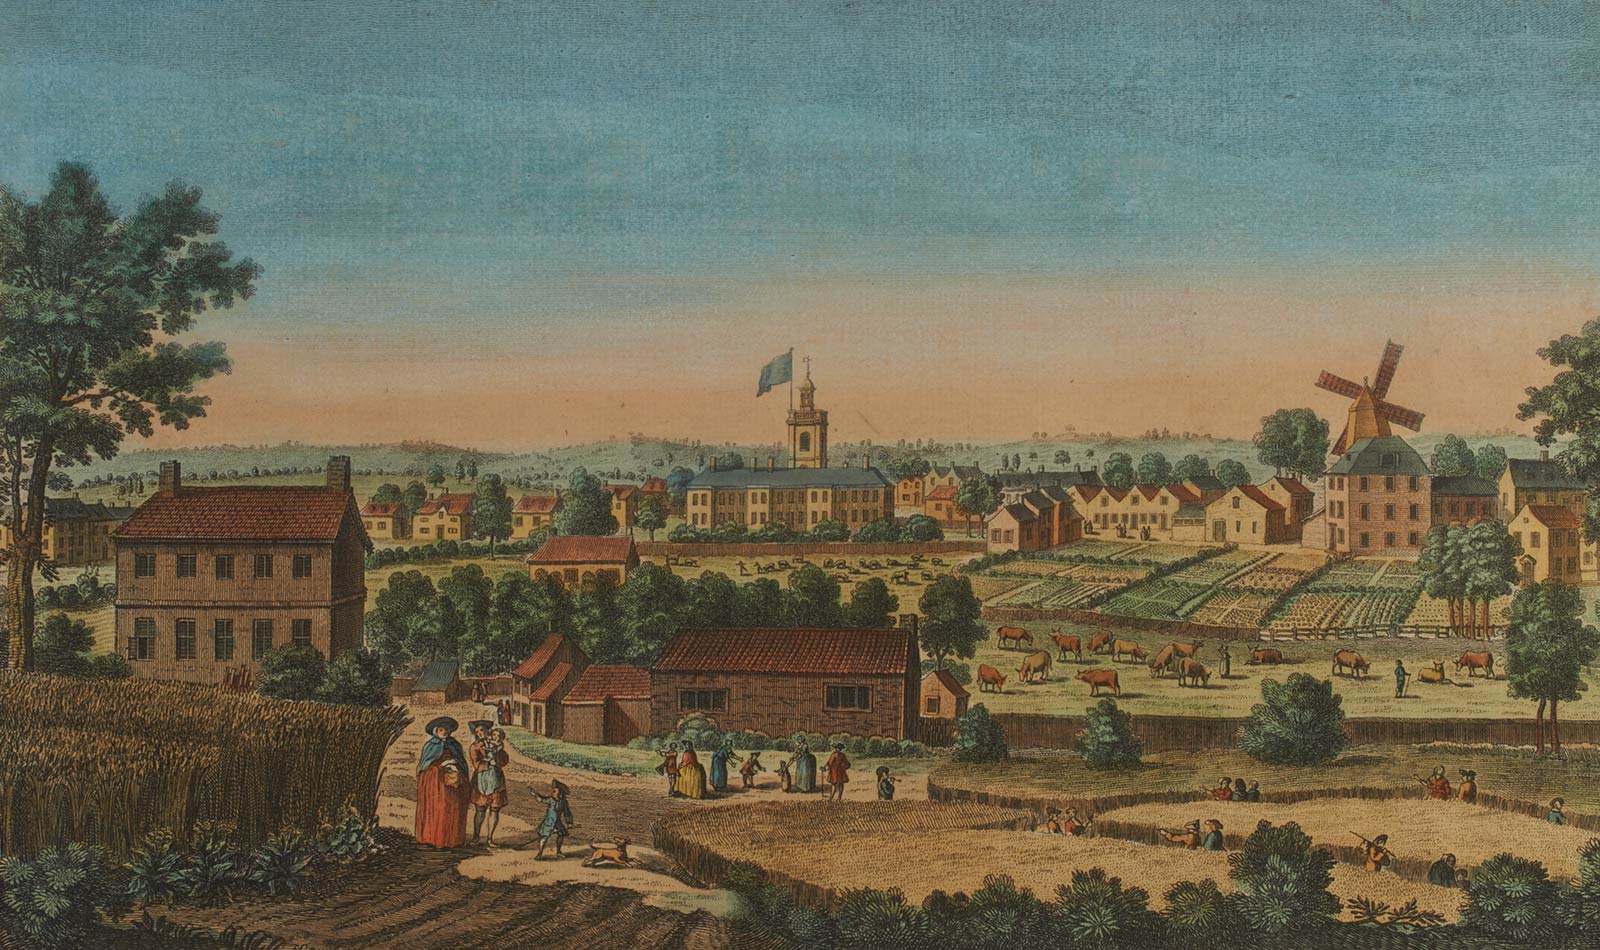 ‘The east view of Wandsworth’ coloured engraving by Bowles, 1751-1800